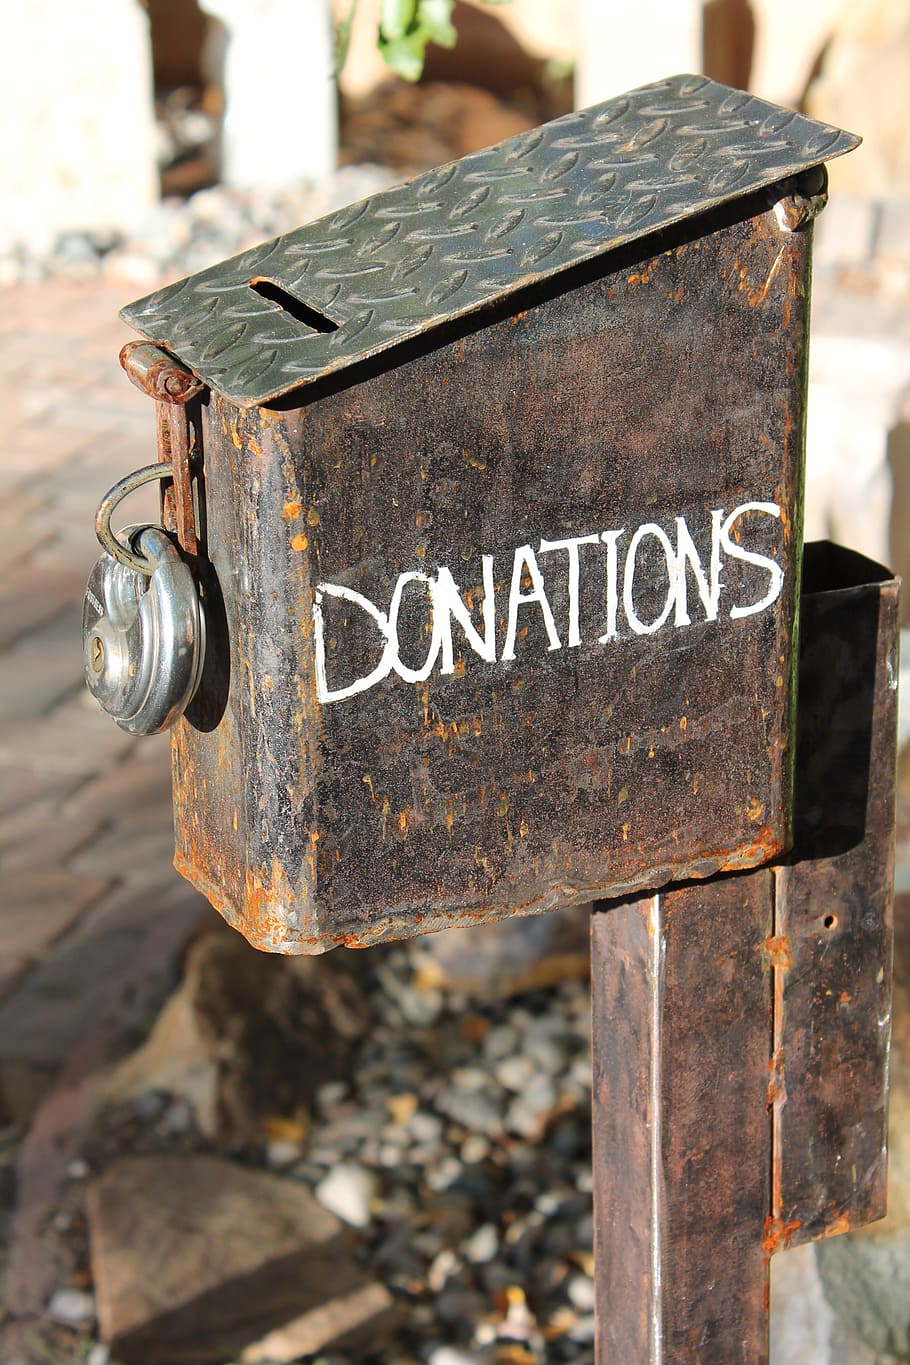 brown, metal donations box, donations, donation box, charity, donate, donating, altruism, helping, altruistic